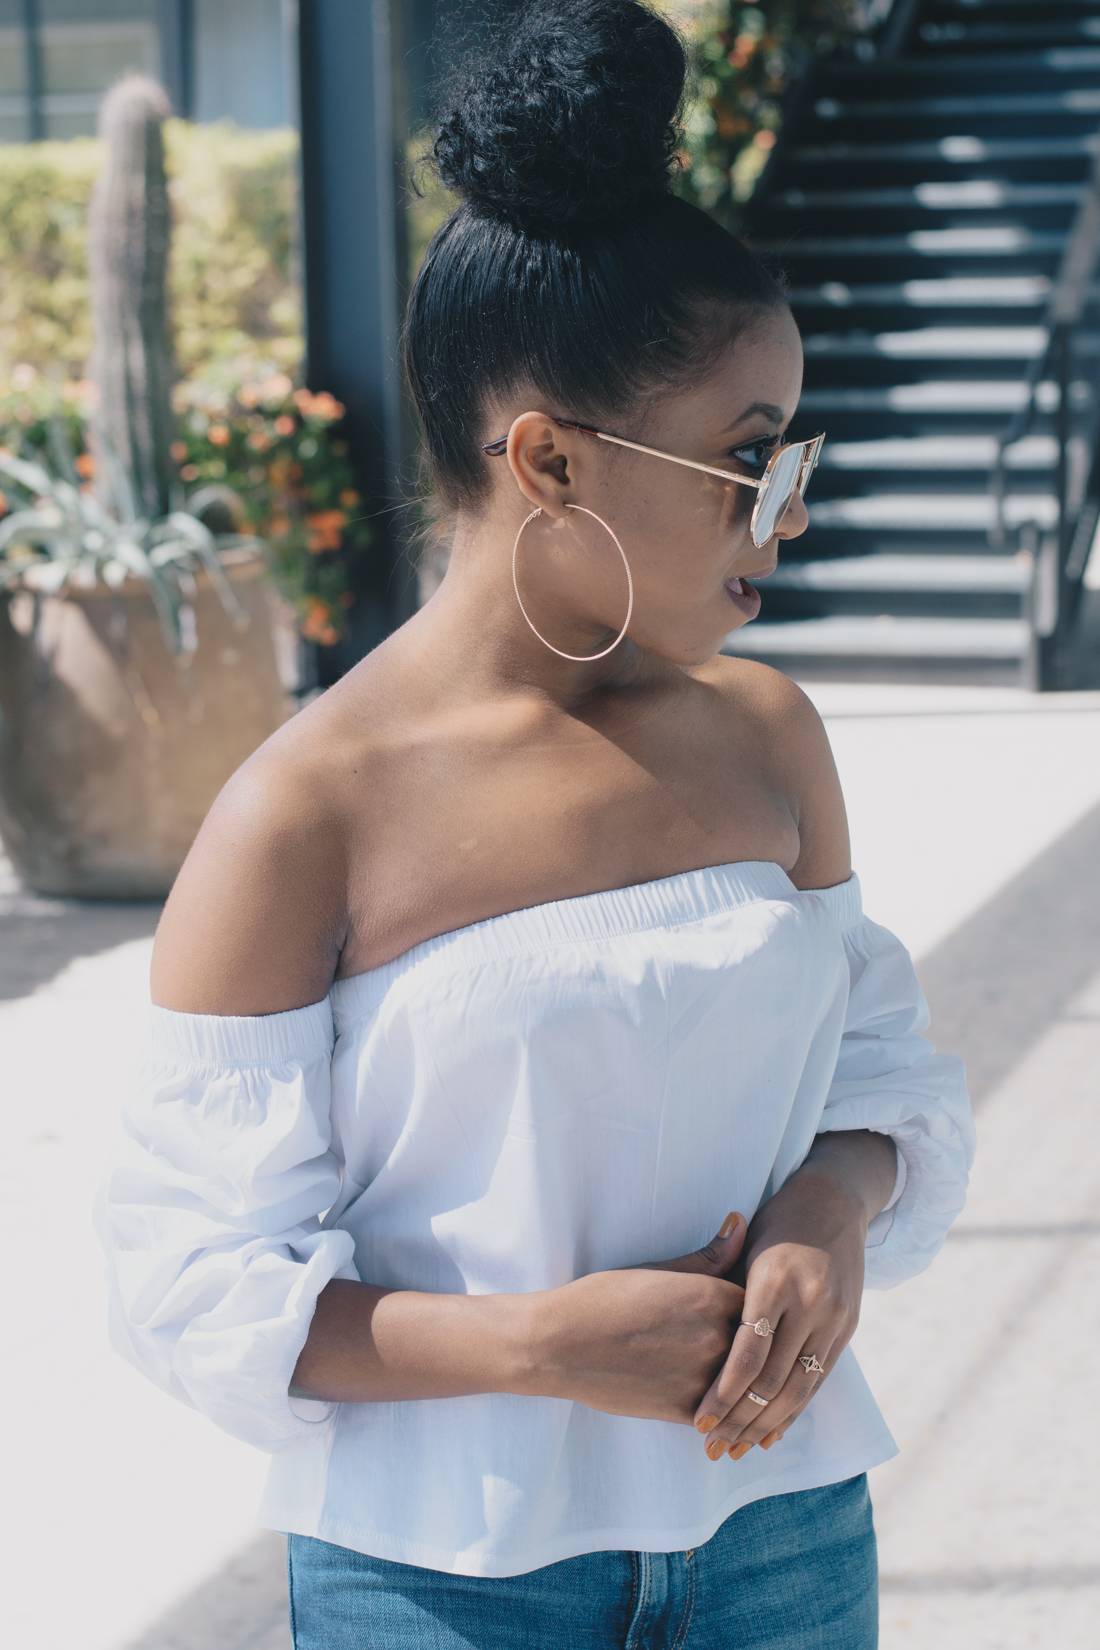 Ripped Hem Jeans and Off teh Shoulder Top-11 - Venti Fashion